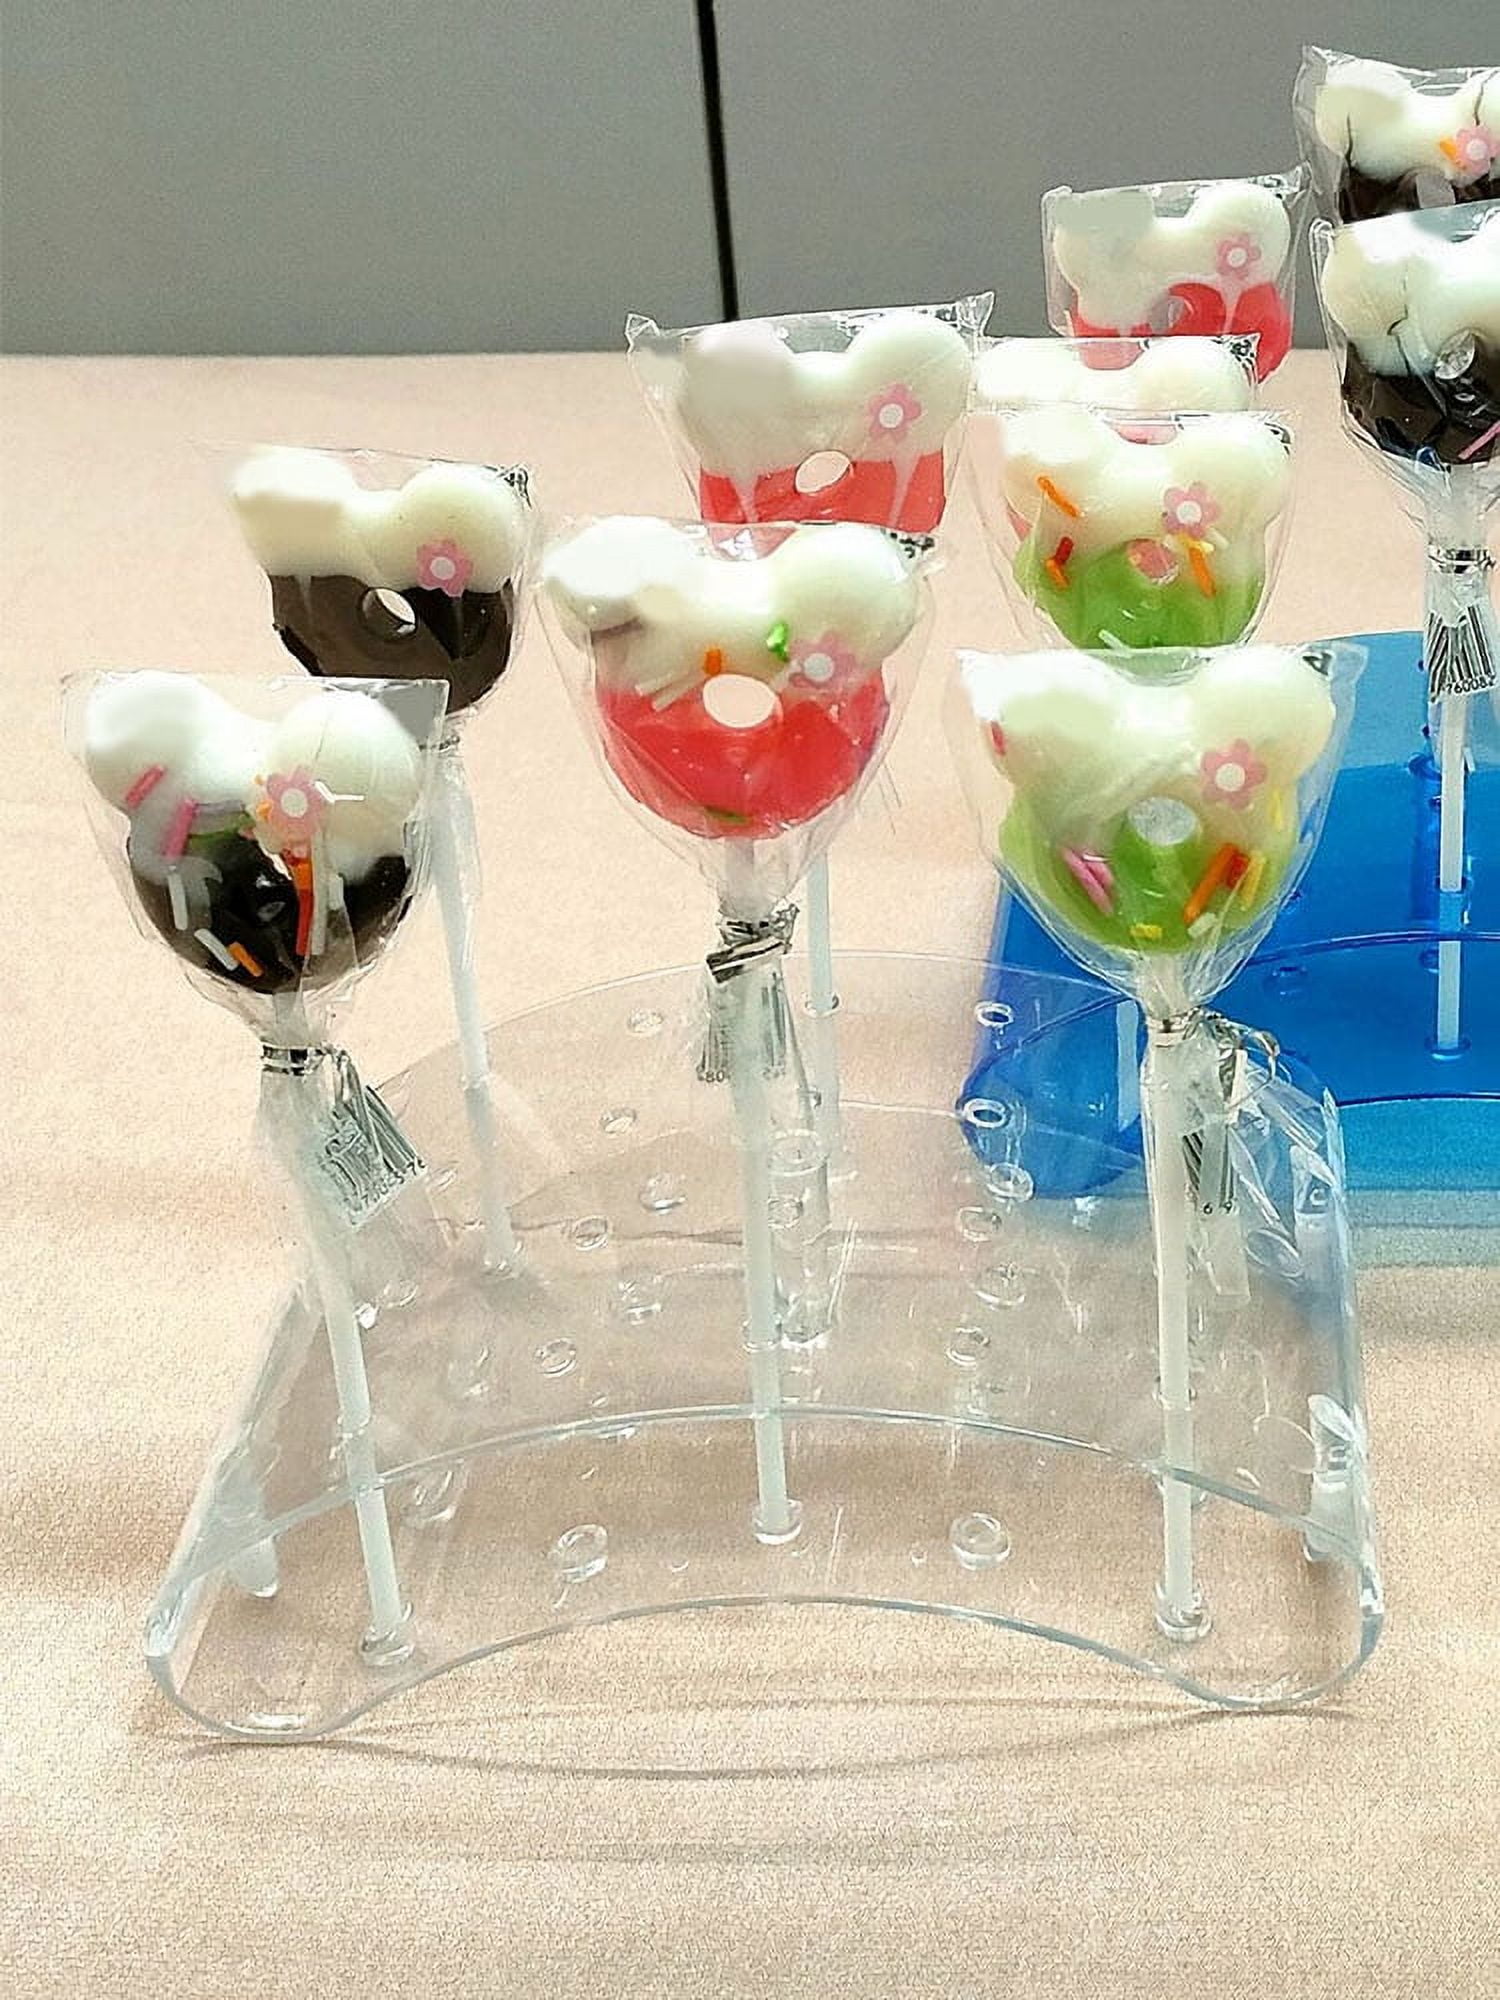 2 PCS Cake Pop Holder Display Stand for 12 Candy Pops Clear